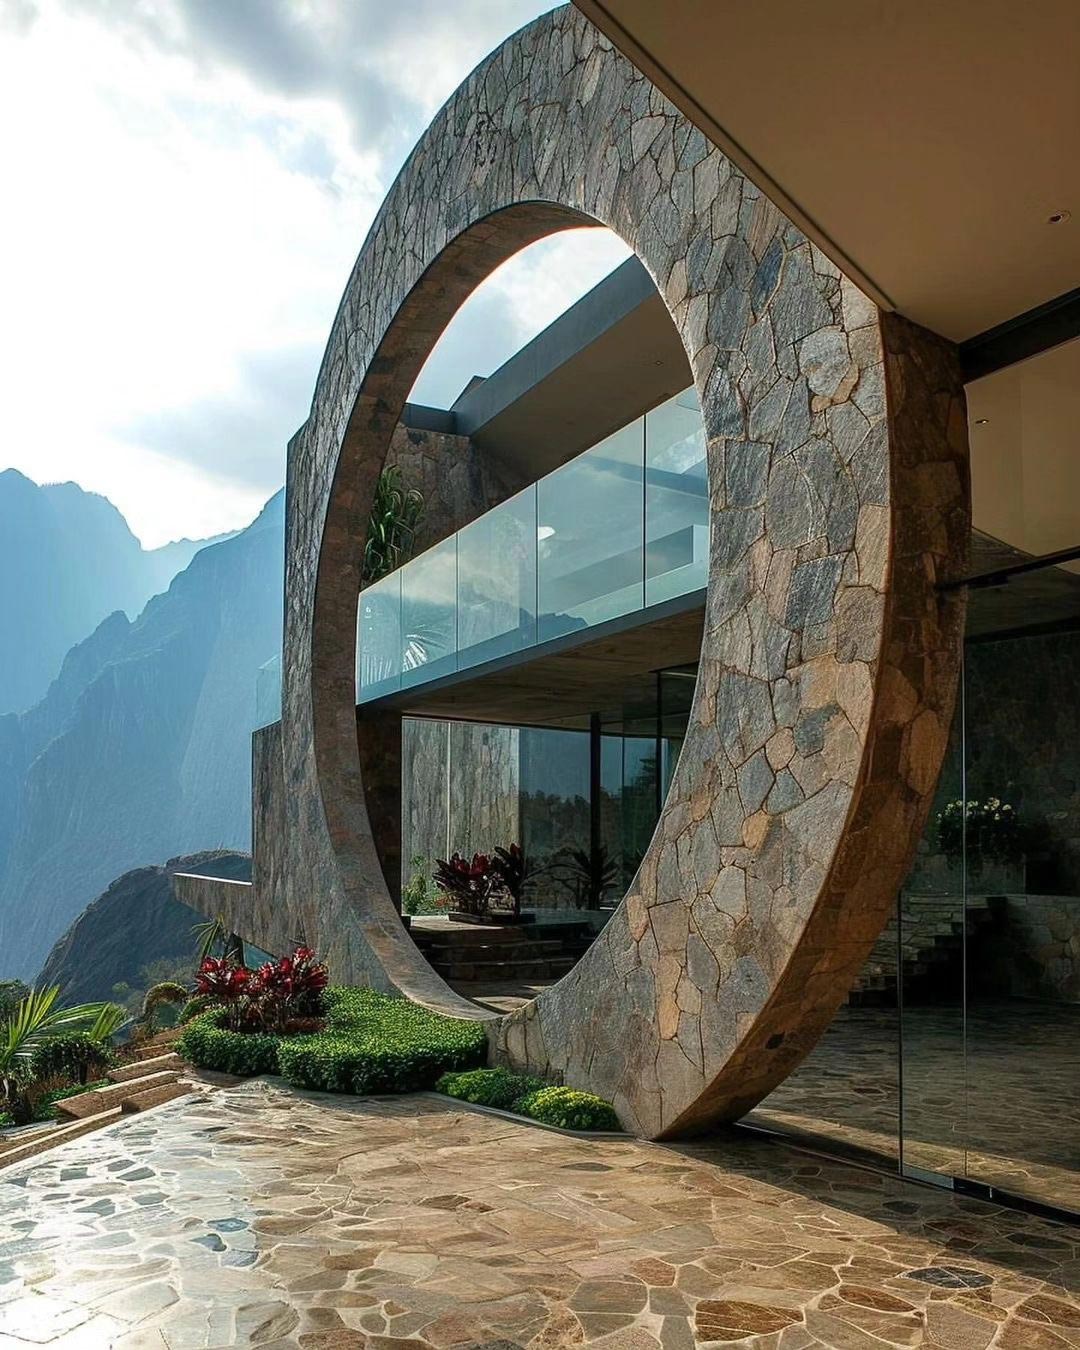 Large circular stone wall structure outside exterior home